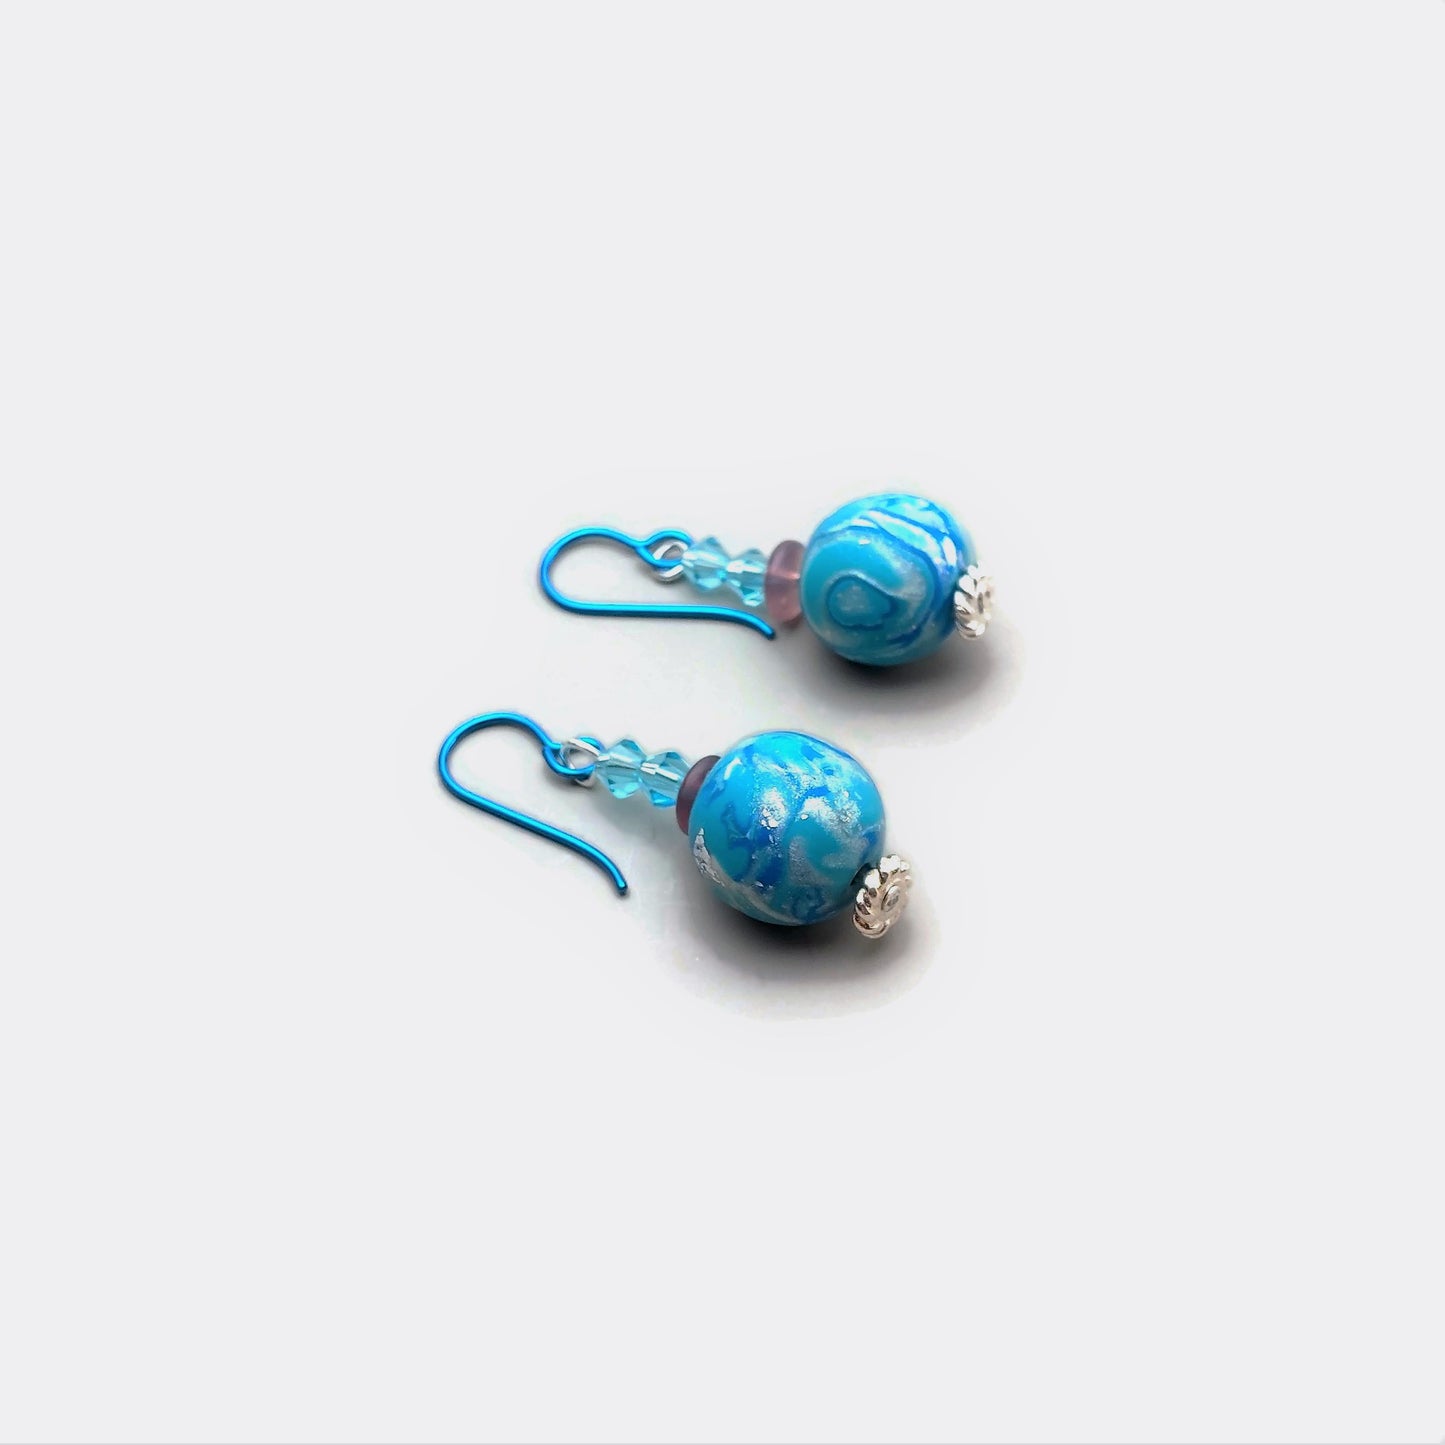 Polymer clay bead and crystal drop earrings with teal niobium ear wires on white background